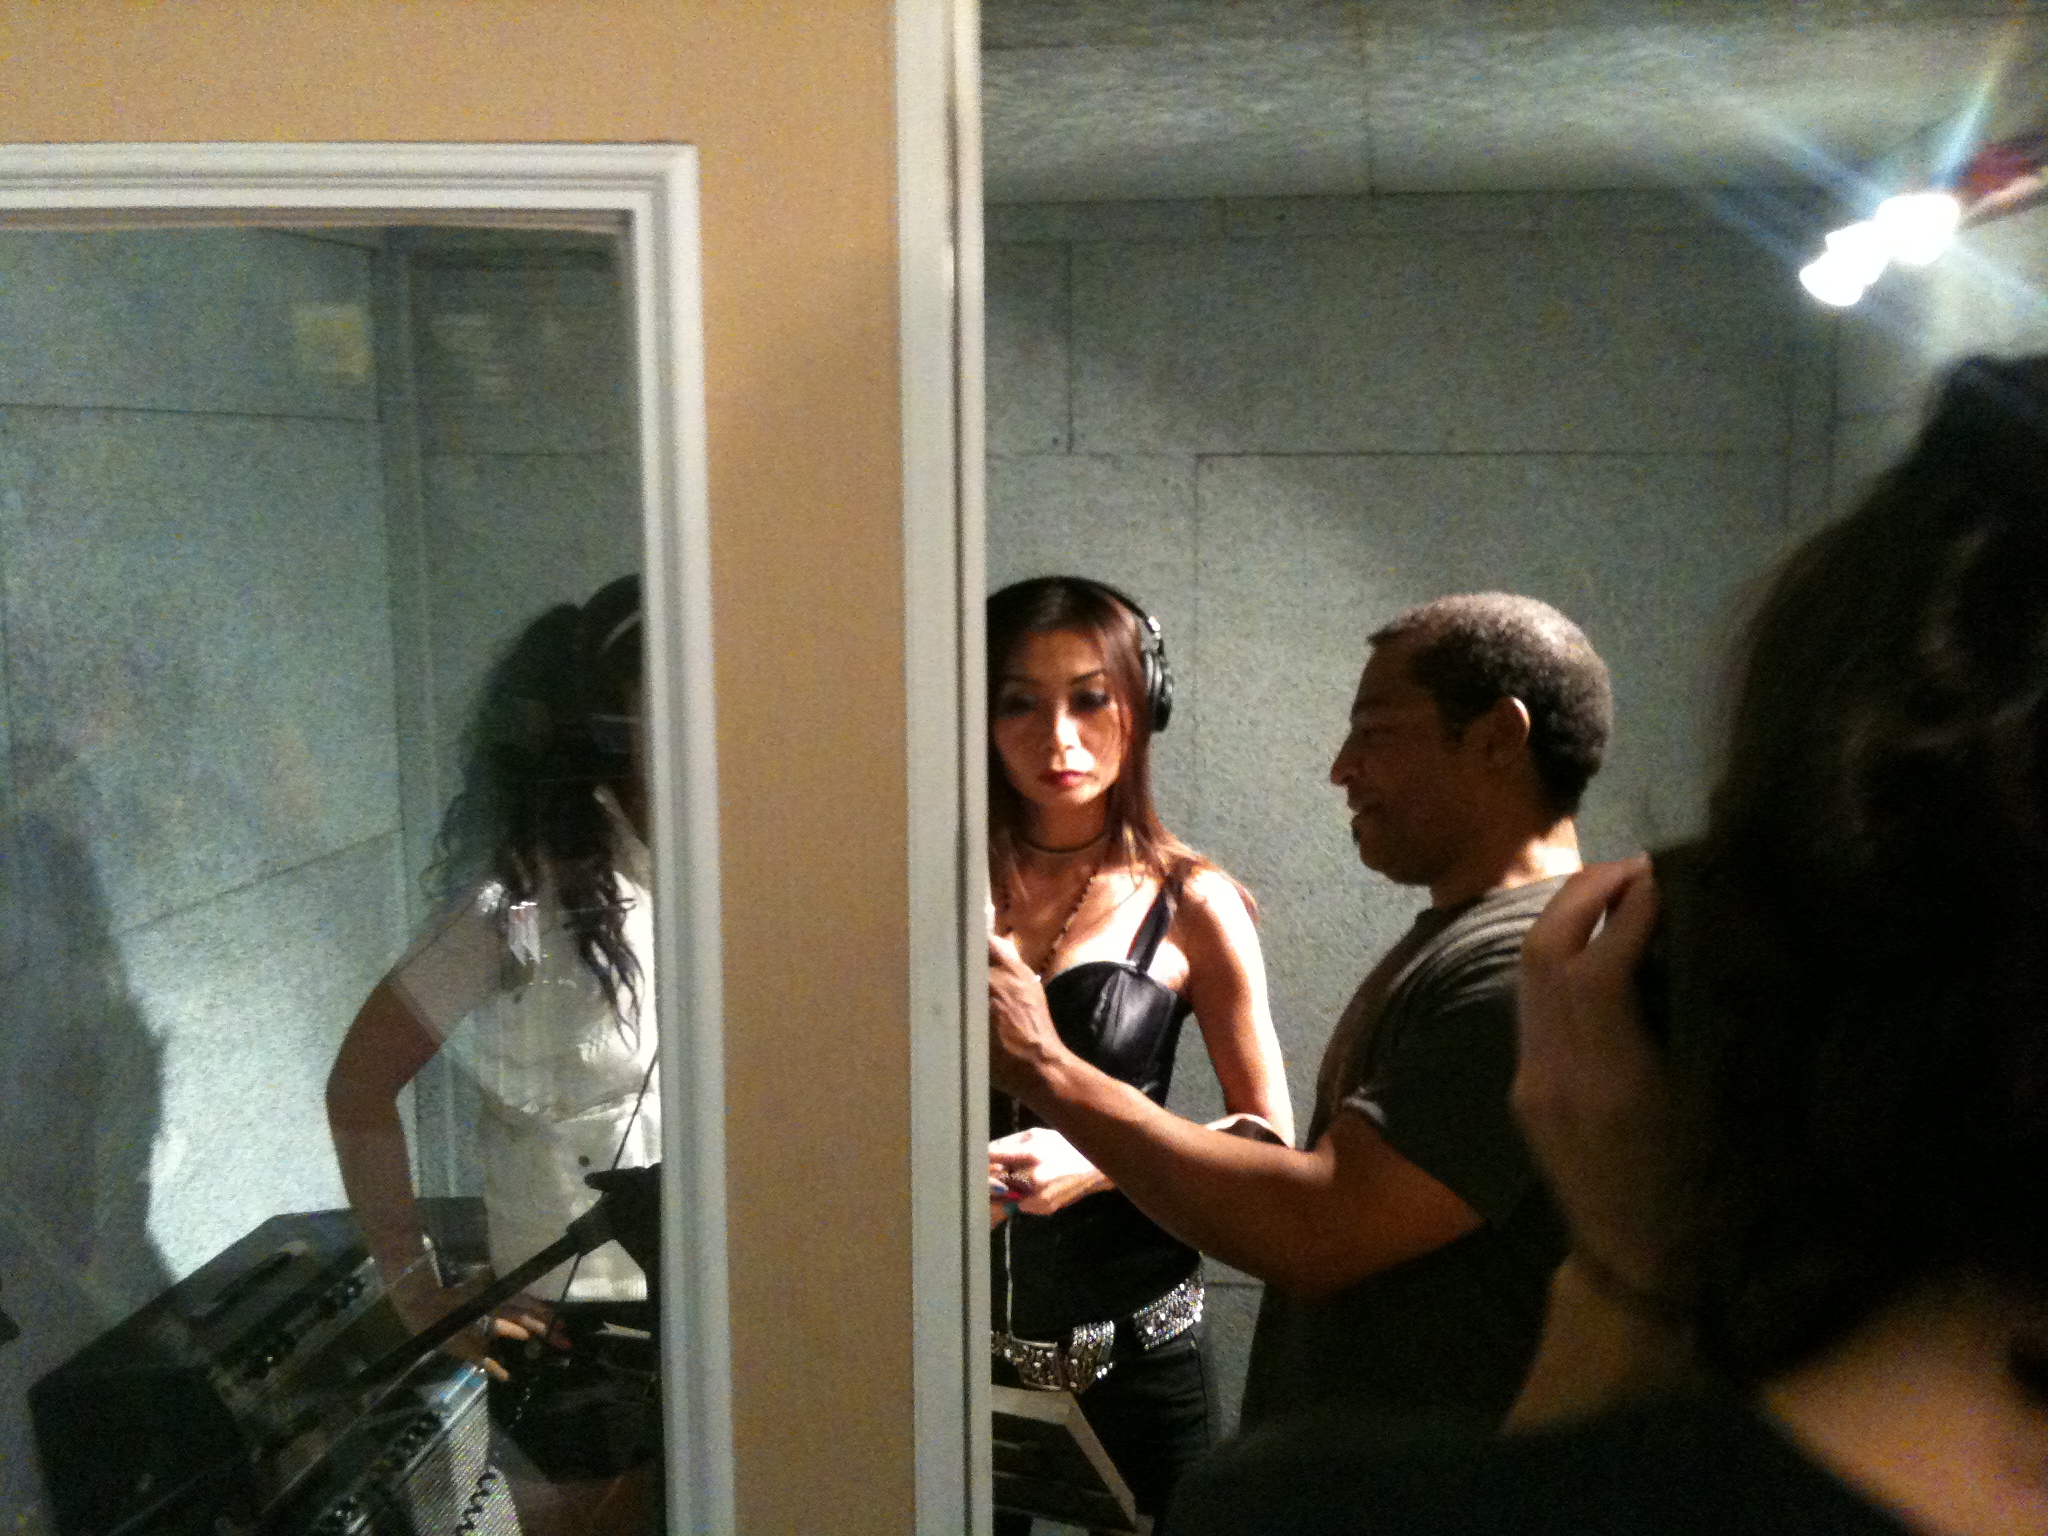 Sulinh Lafontaine as SANJA in 'The Cookies'. Behind the scenes of a recording session in music studio